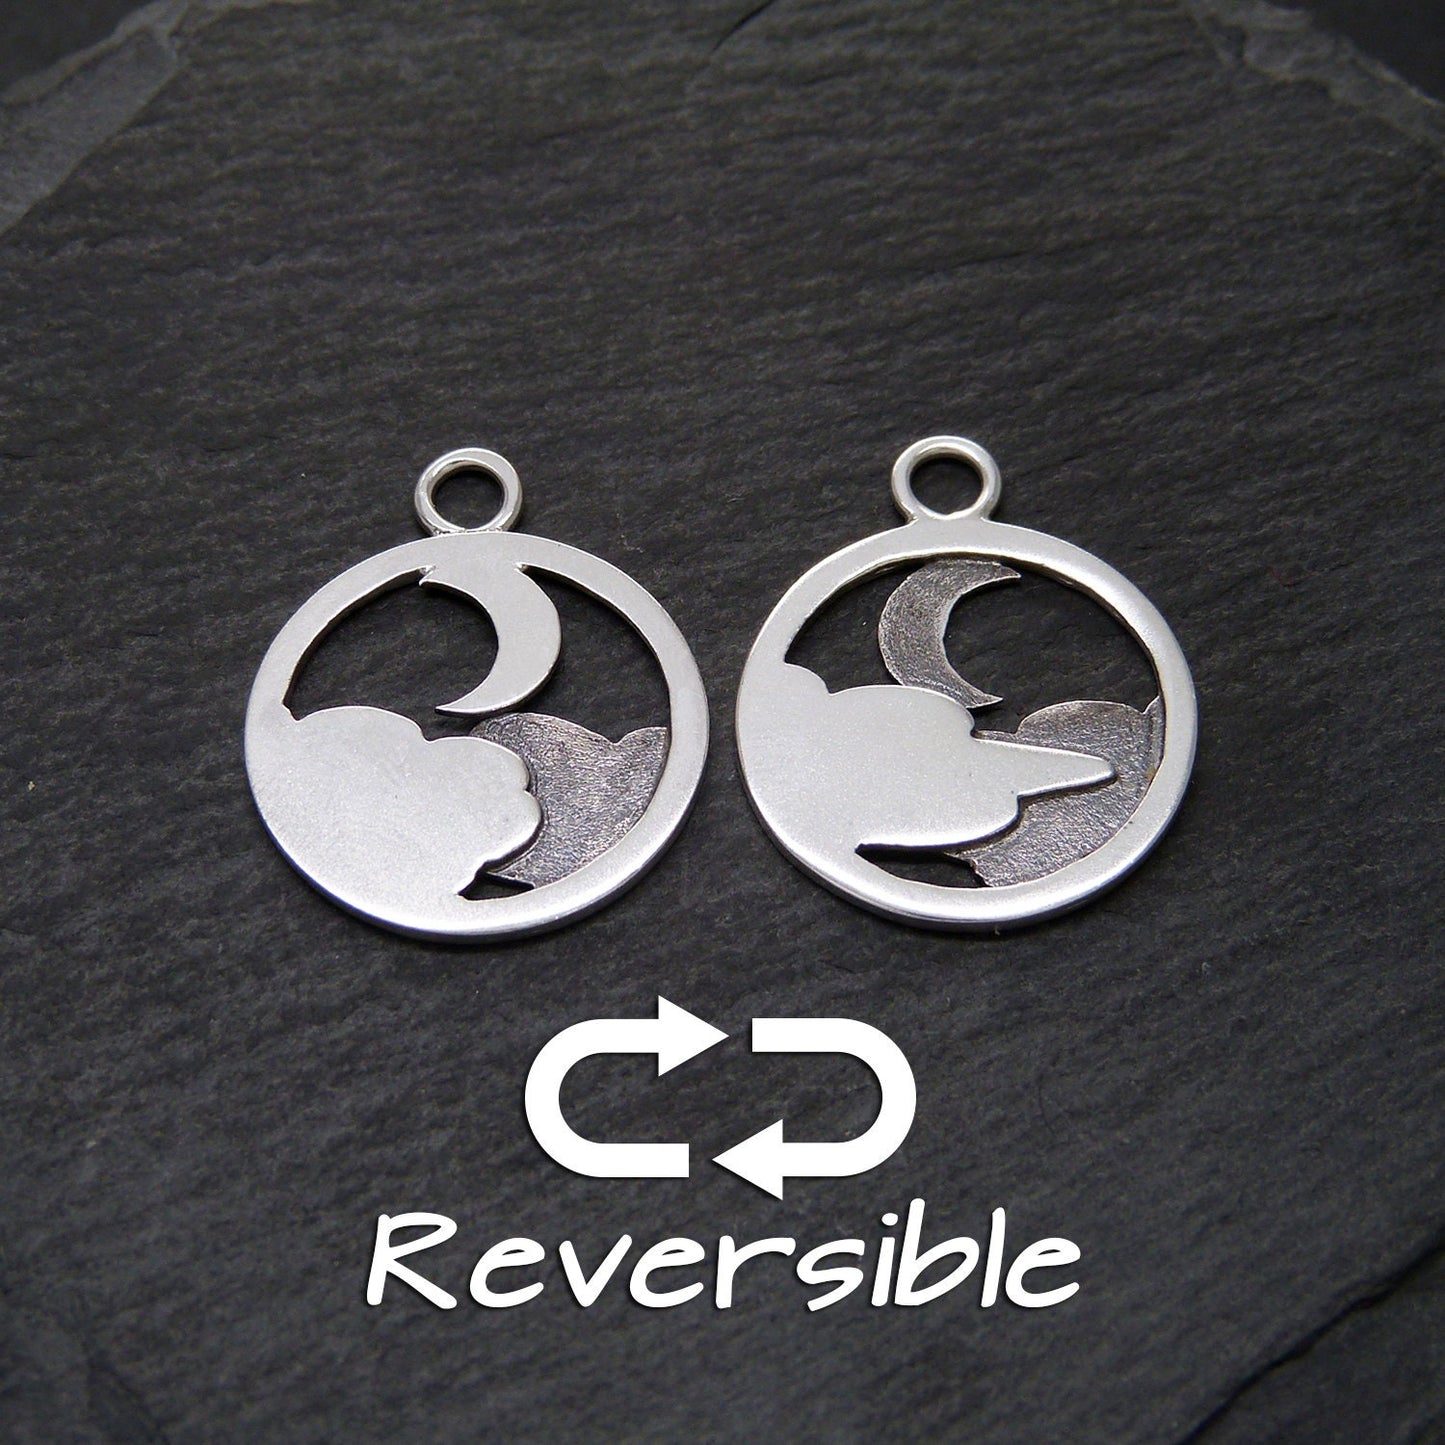 Reversible 925 silver Moon and Clouds pendant